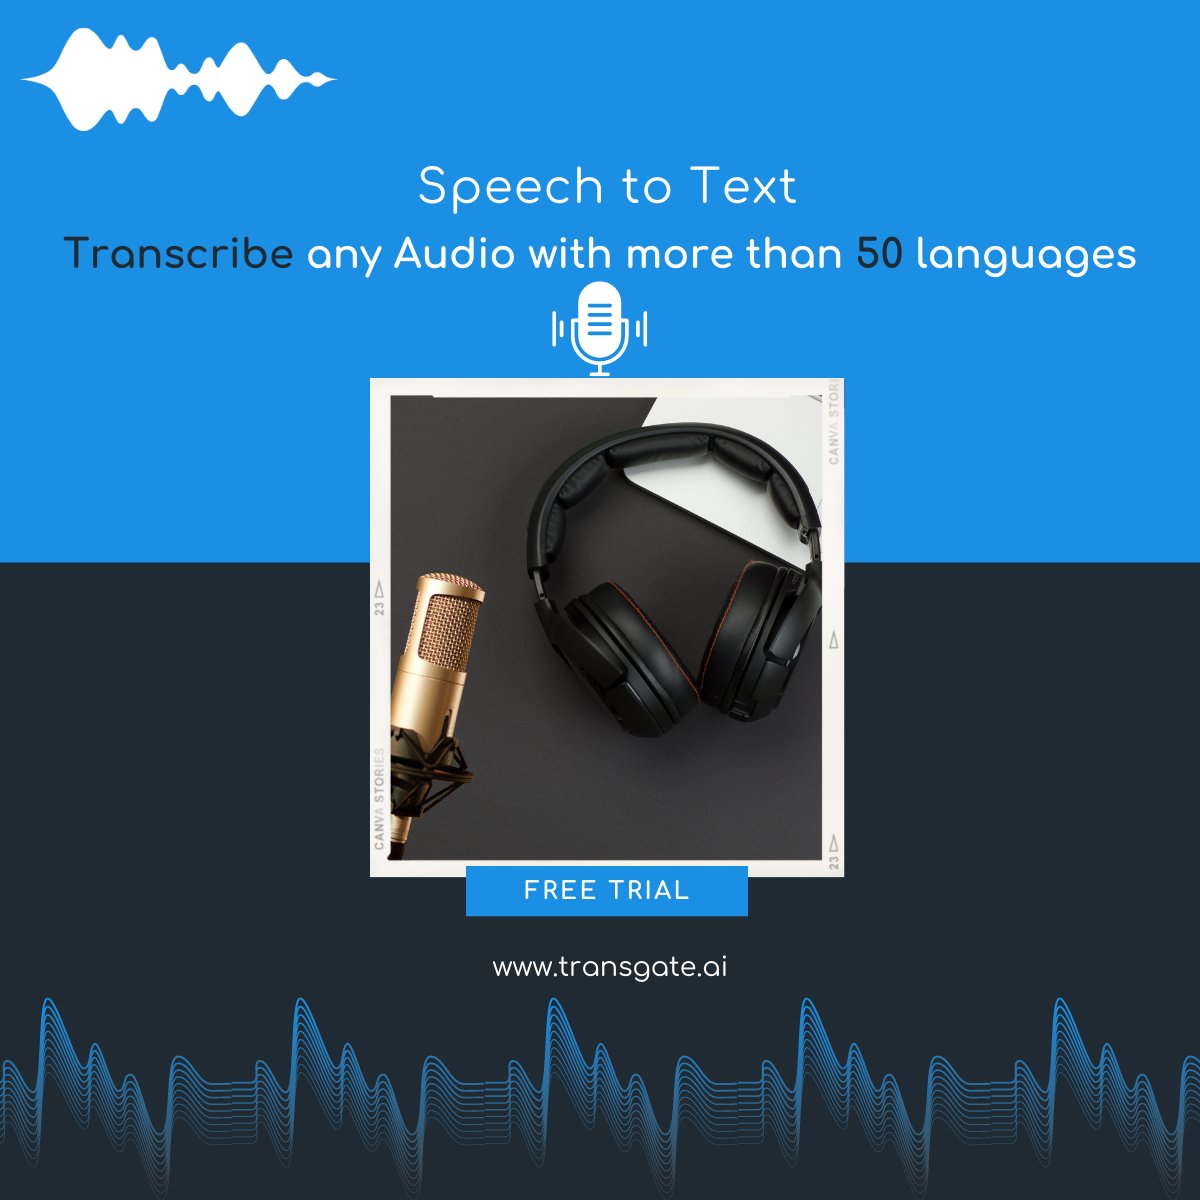 Transgate makes global communication seamless by transcribing audio to text in over 50 languages.

Please Visit: transgate.ai 

#Transgate #accuracy #convertaudiototext #SpeechToText #AI #Productivity #transcription #Efficiency #SaveTime #AudioToText #PayAsYouGo…